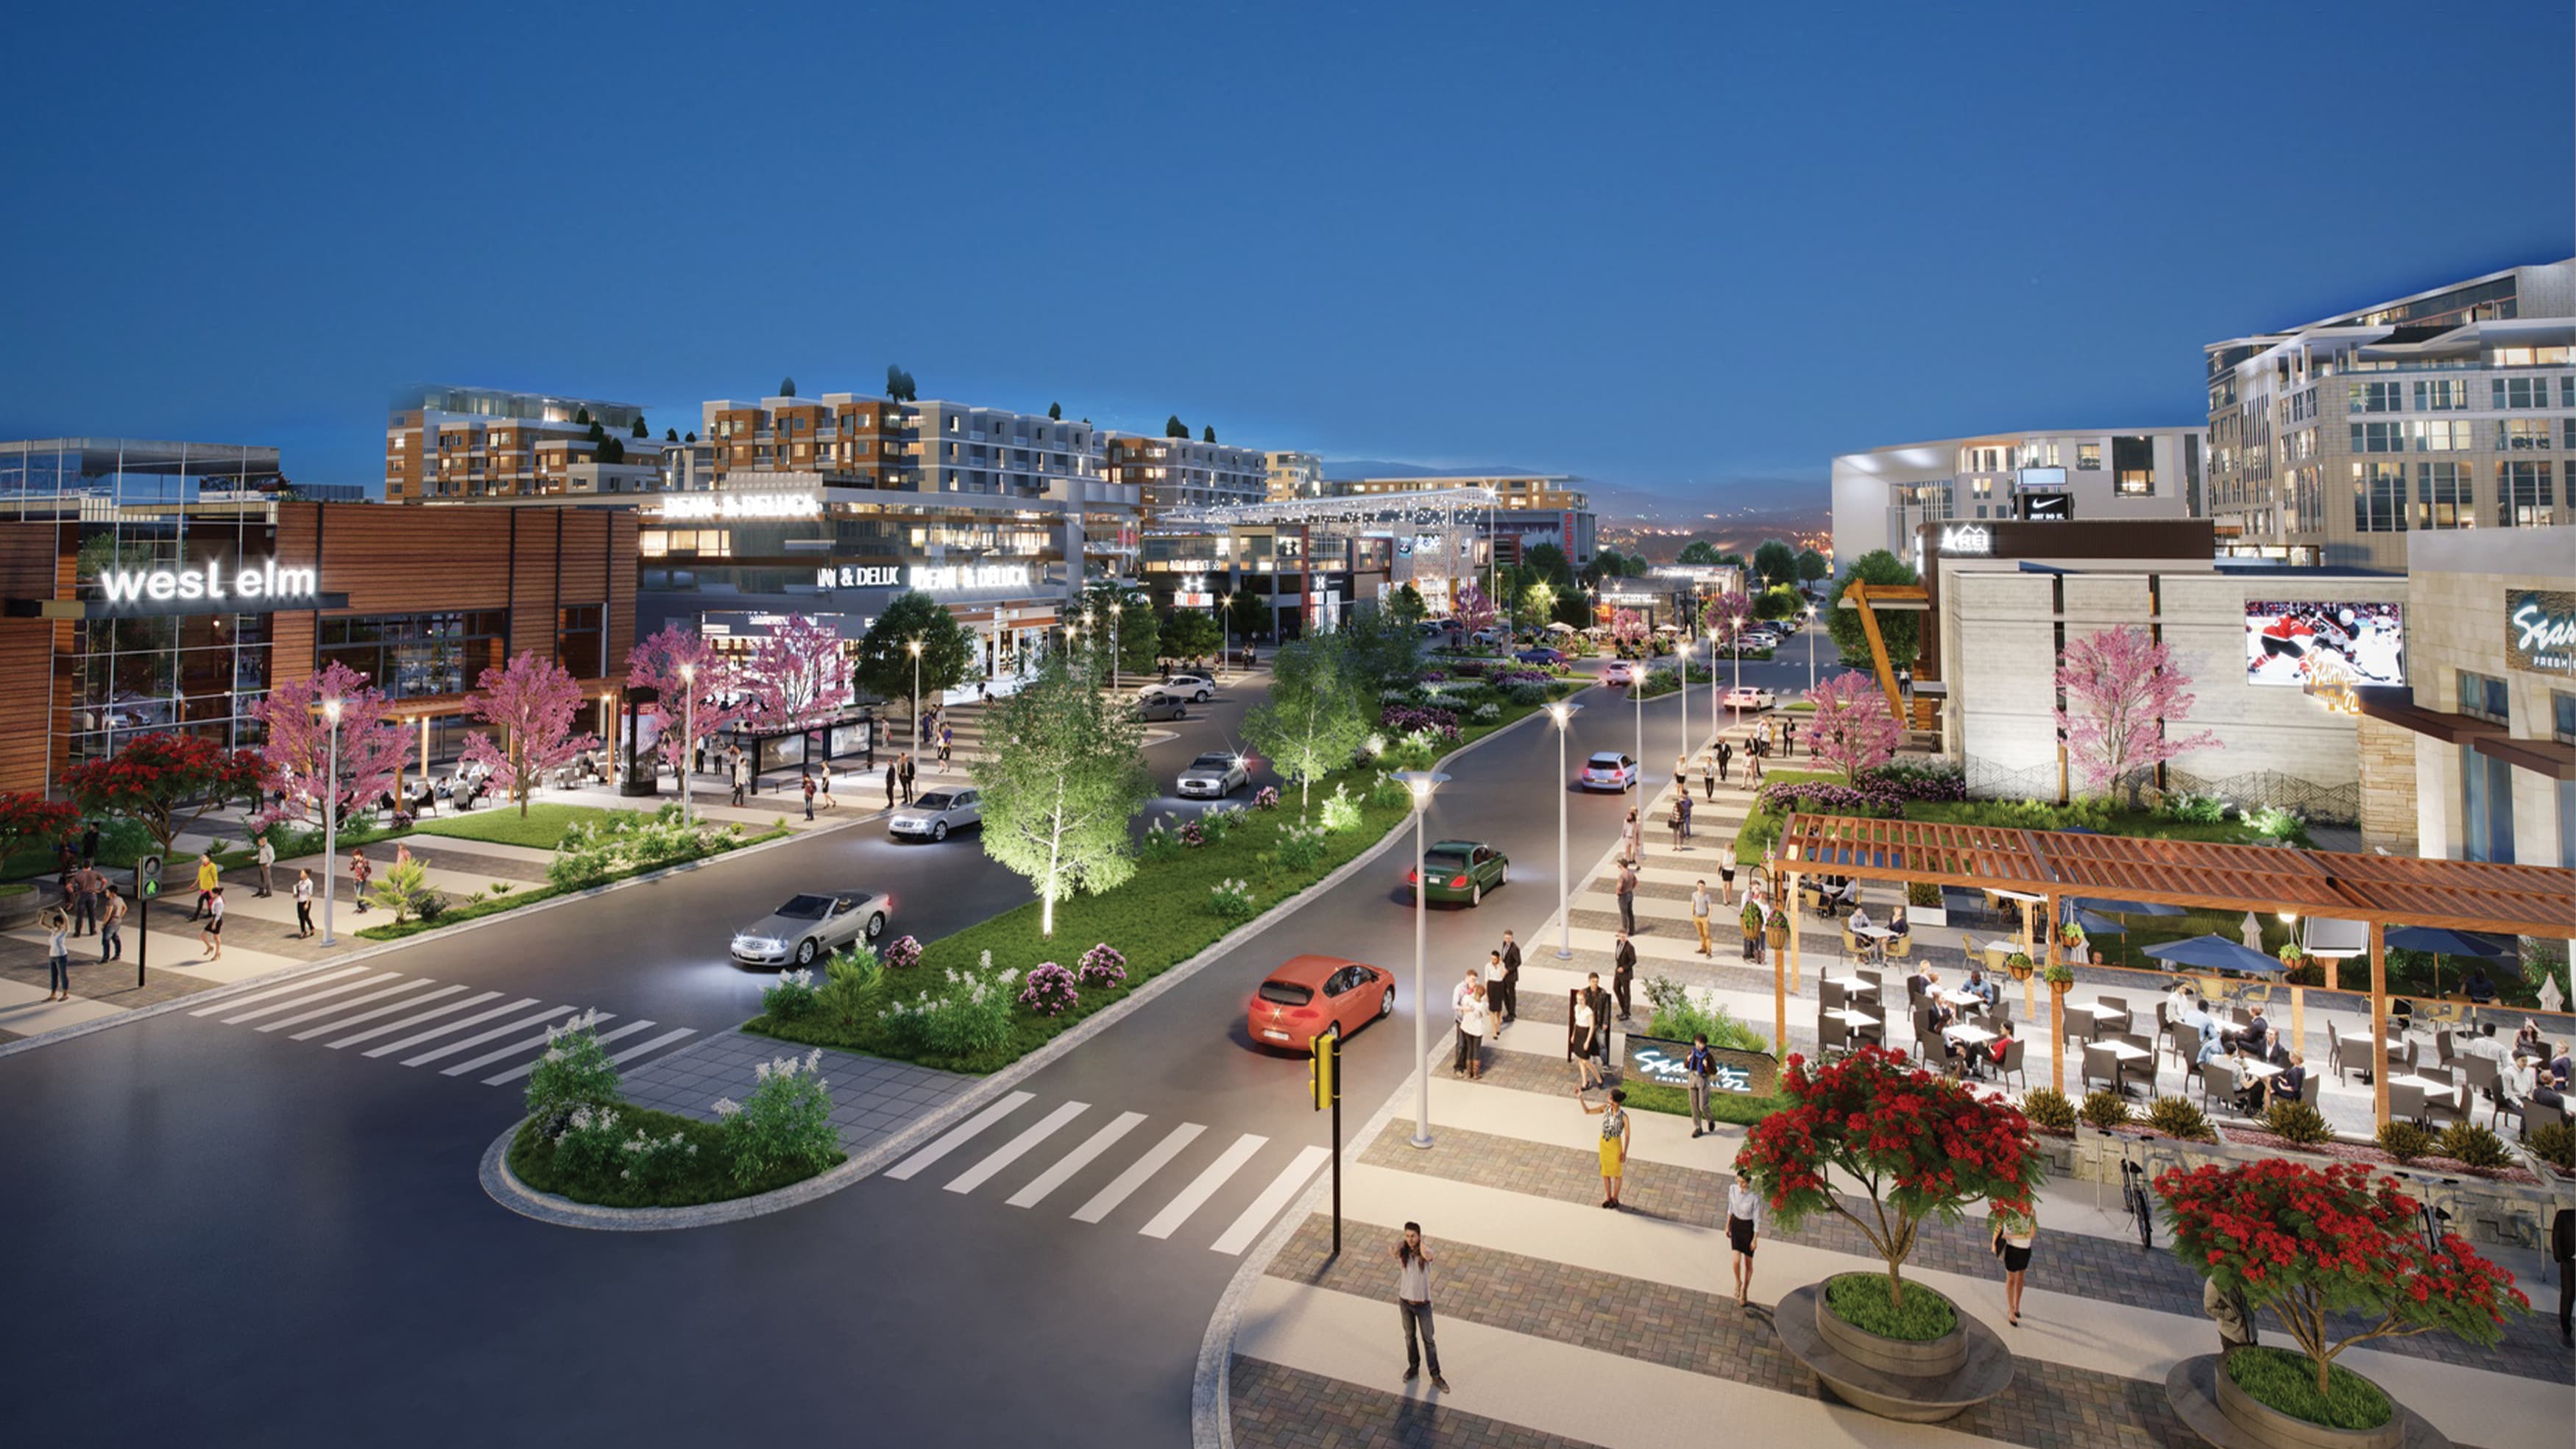 Evening view of a mixed-use and retail development with shopping, dining, and people walking around outdoors.